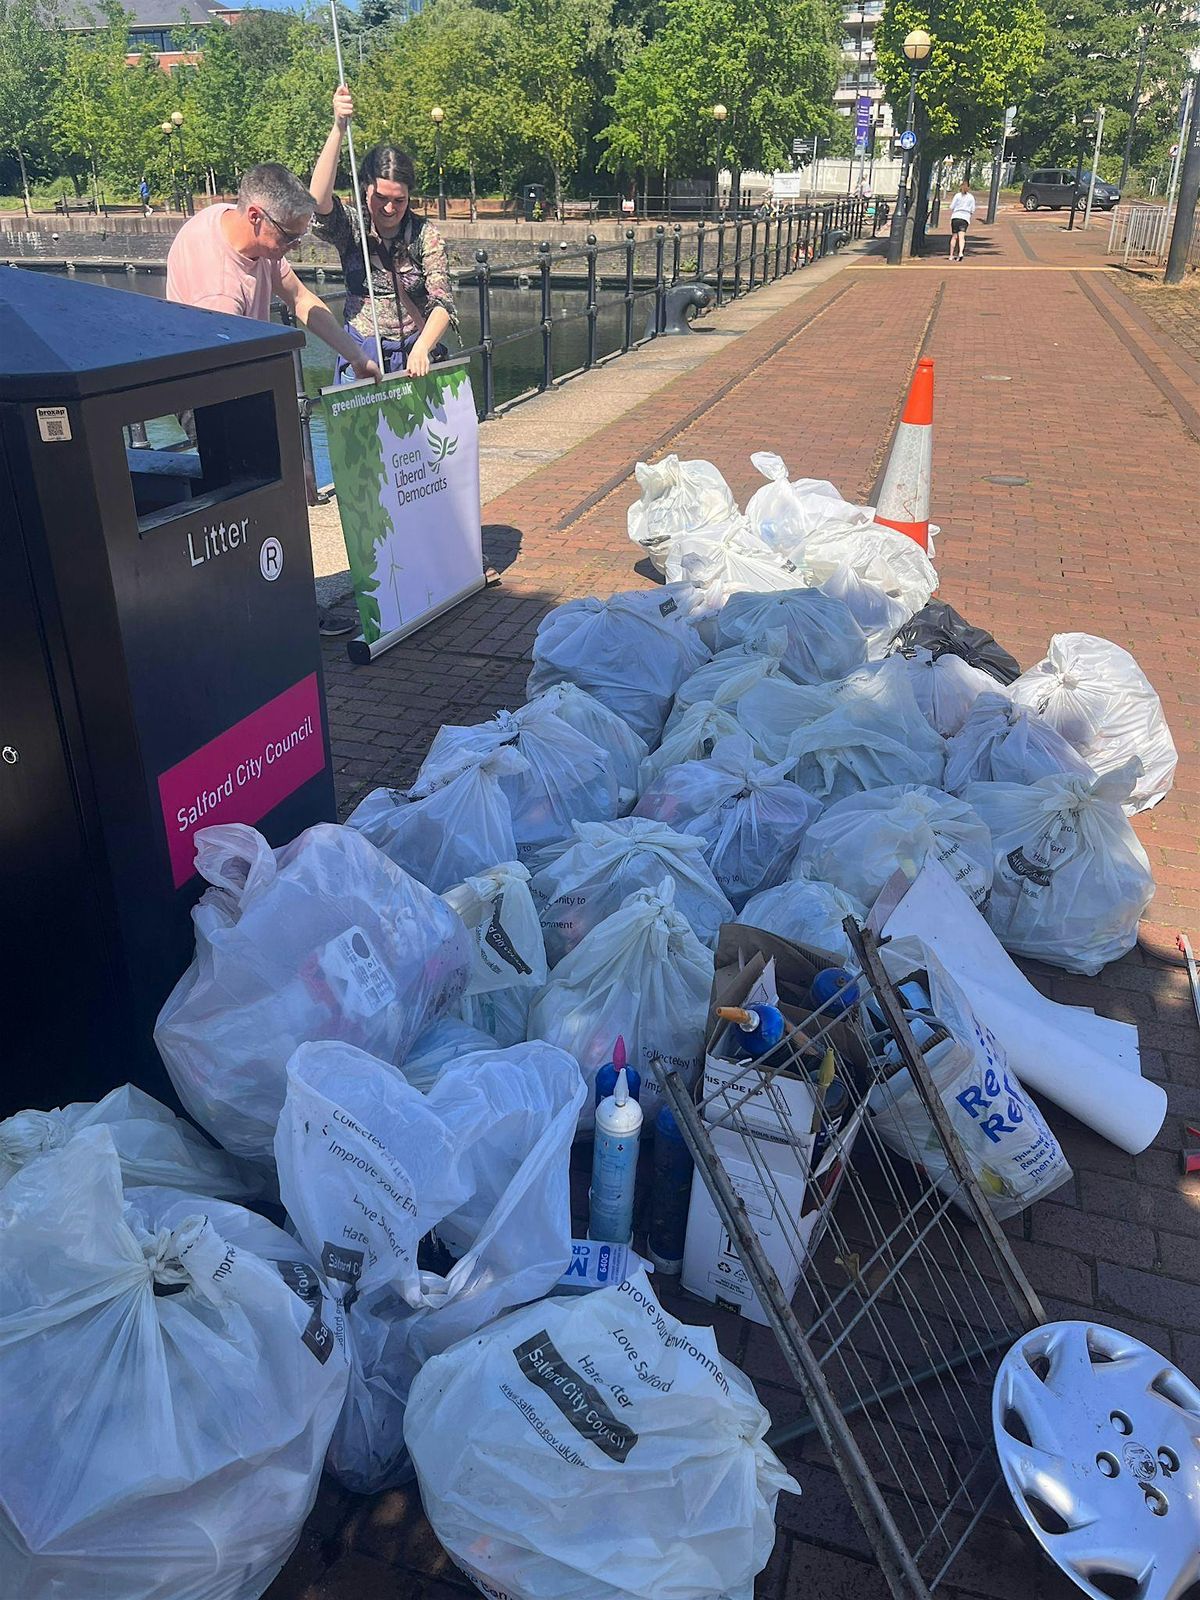 CleanUpTheQuays - Community Clean Up